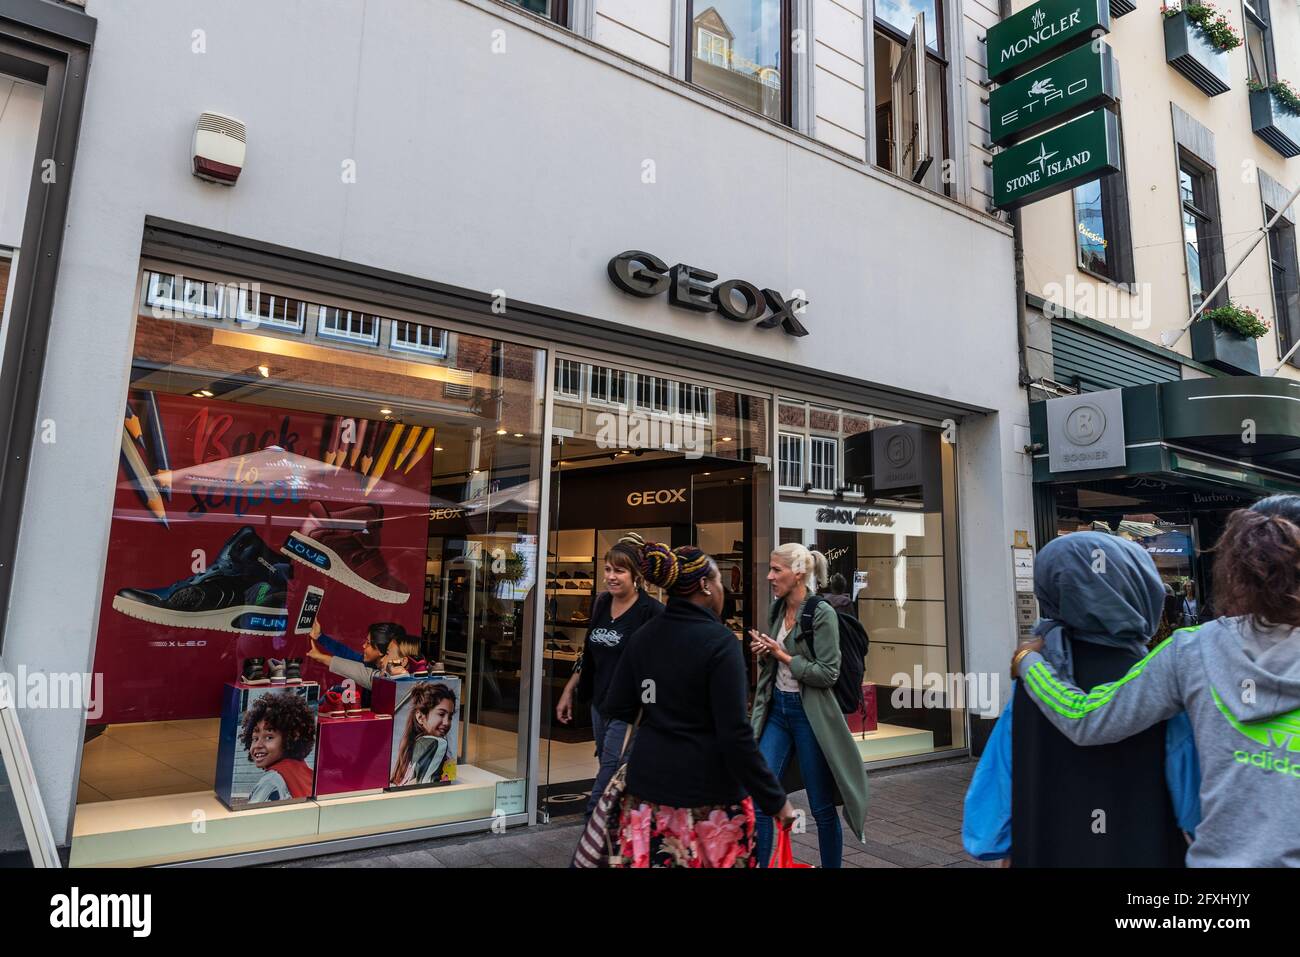 Geox Shop High Resolution Stock Photography and Images - Alamy